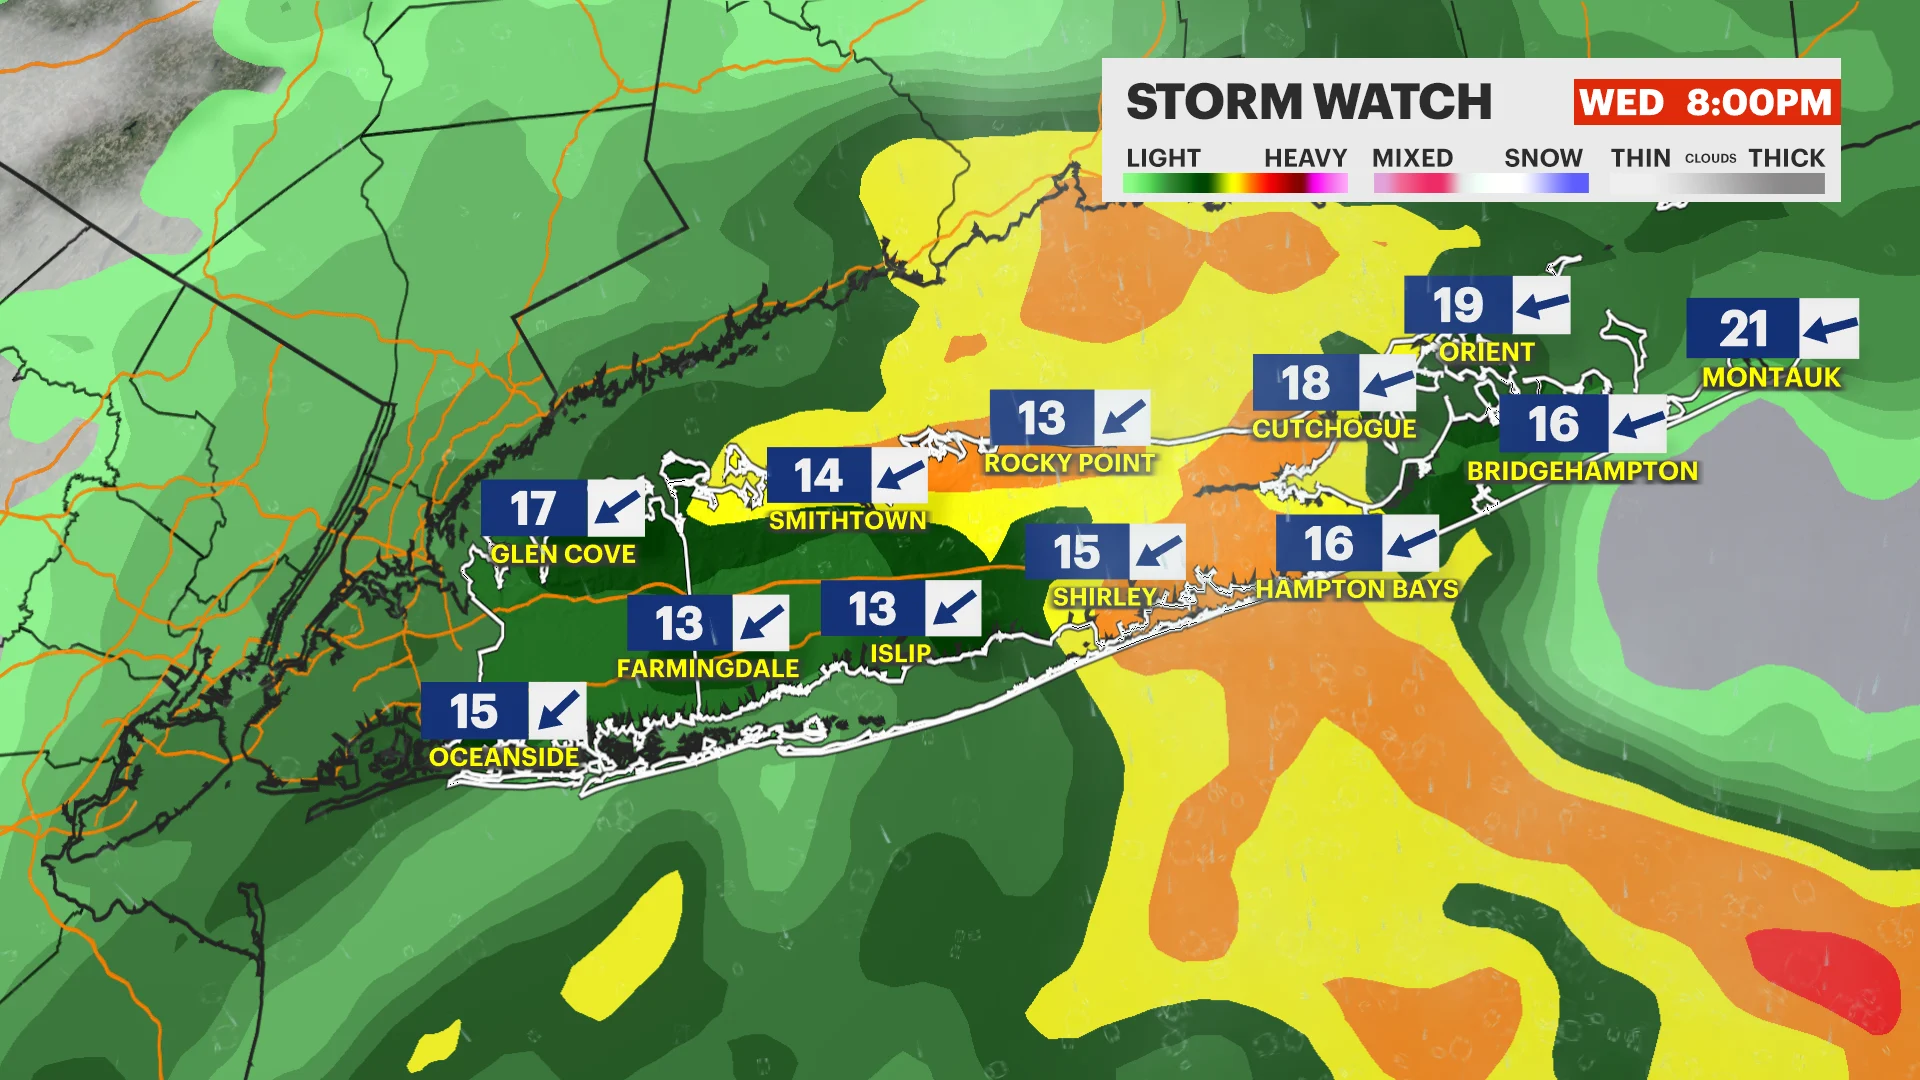 STORM WATCH: On and off rain today with highs near 64